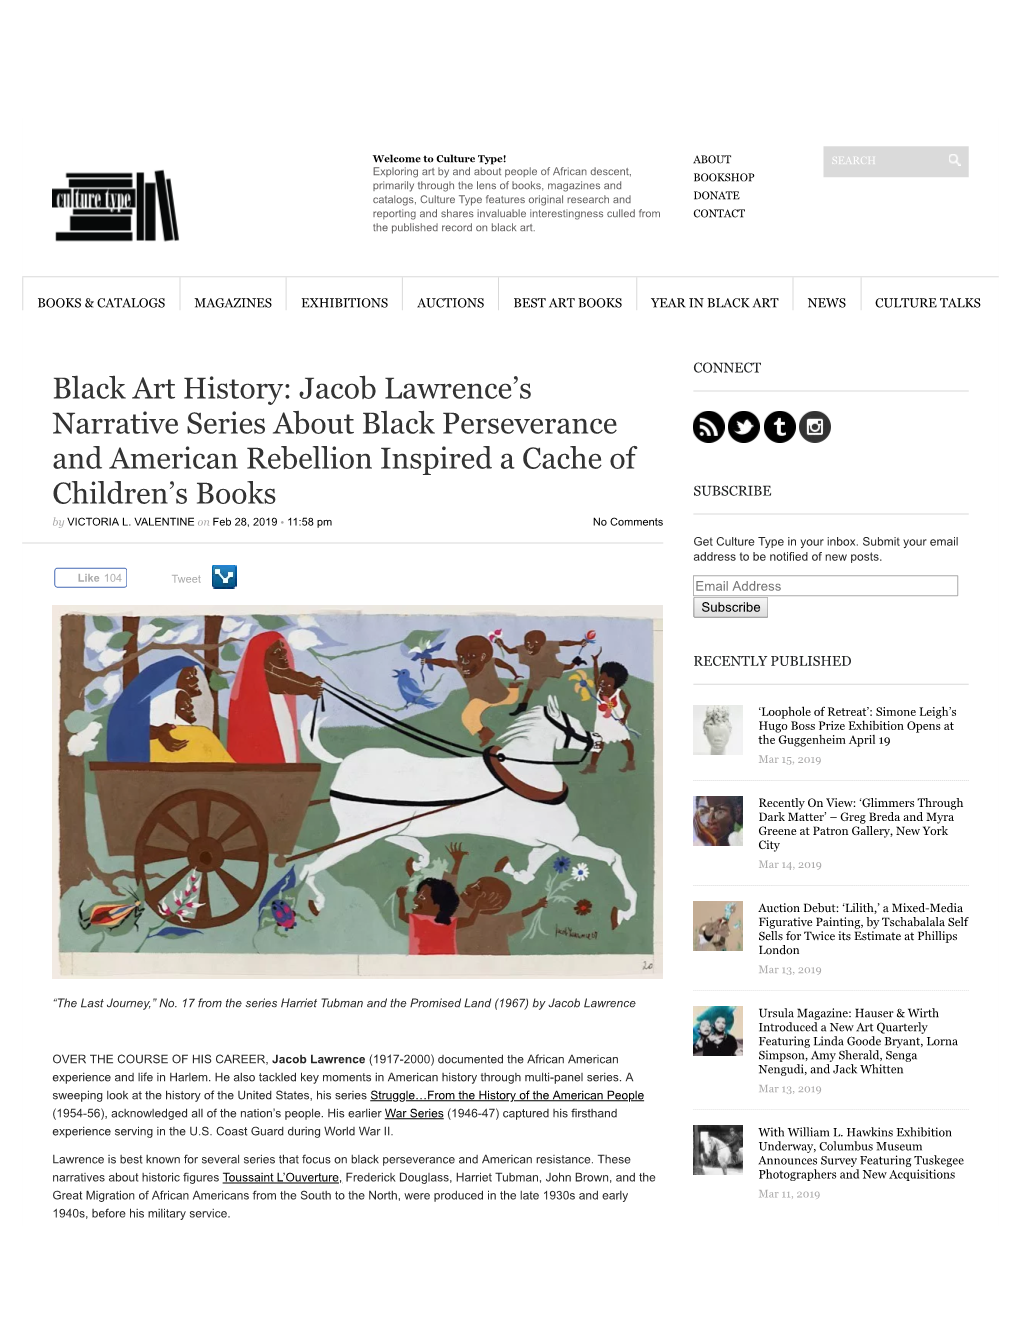 Black Art History: Jacob Lawrence's Narrative Series About Black Perseverance and American Rebellion Inspired a Cache of Child